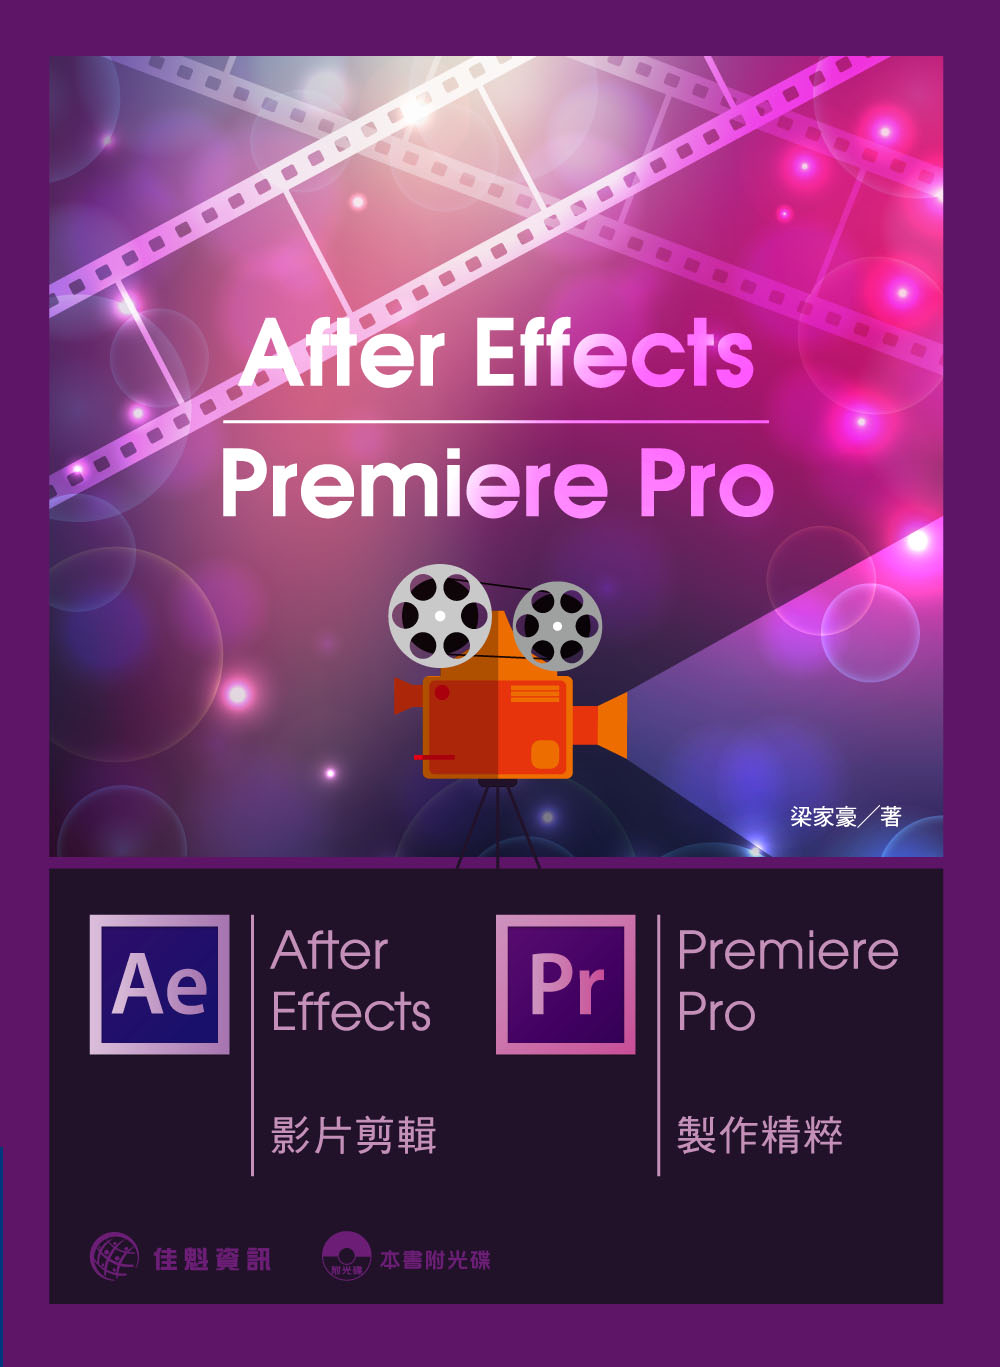 After Effects & Premiere Pro 影片剪輯／製作精粹